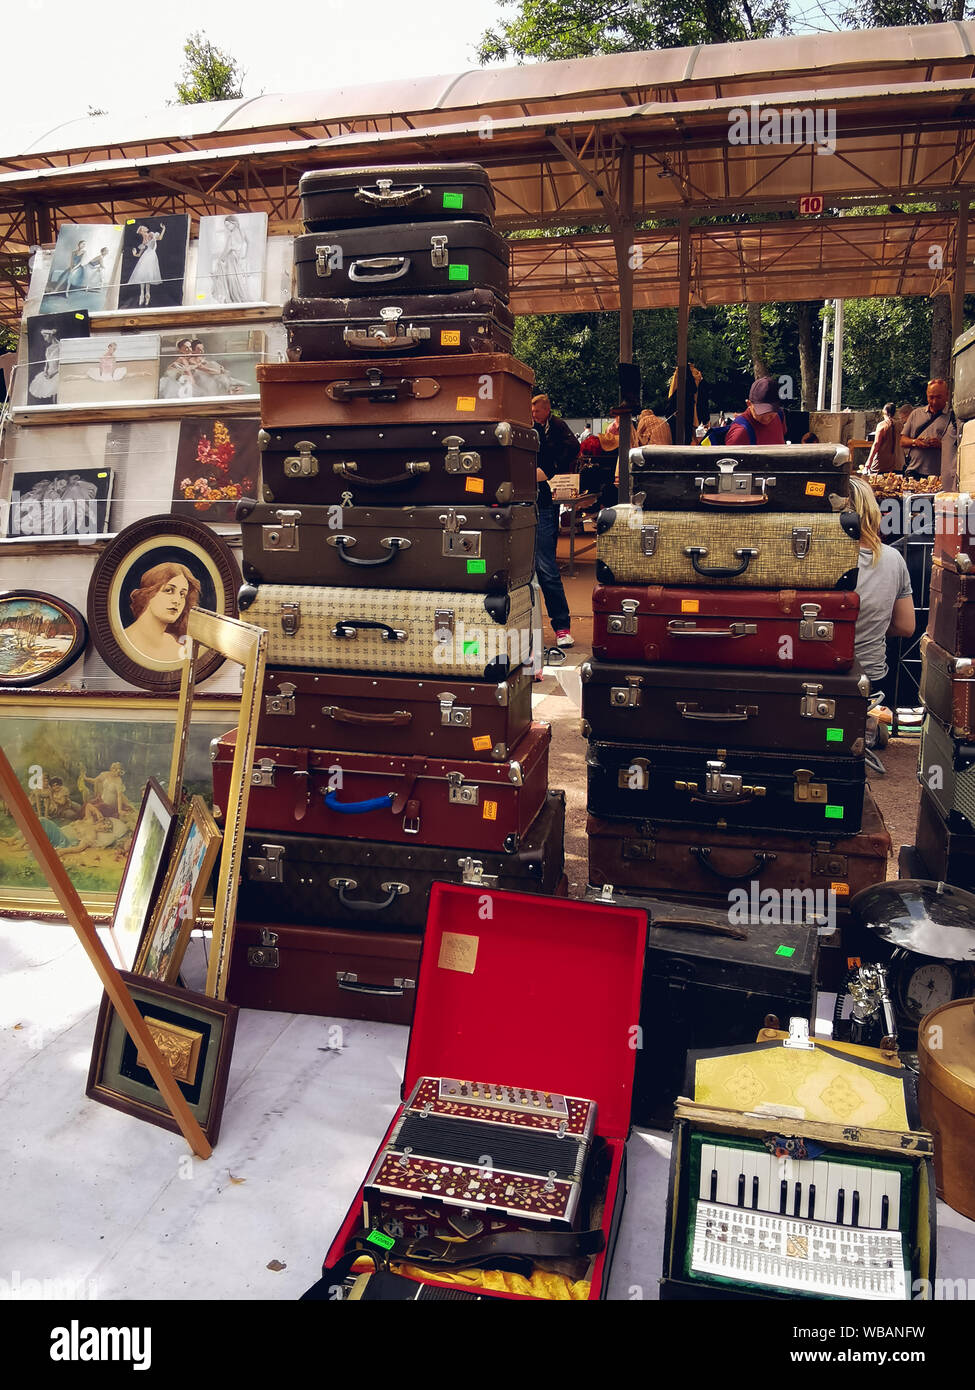 Saint-Petersburg, Russia - 22 August 2019: many old suitcases,paintings and accordions are sold at the flea market. Stock Photo